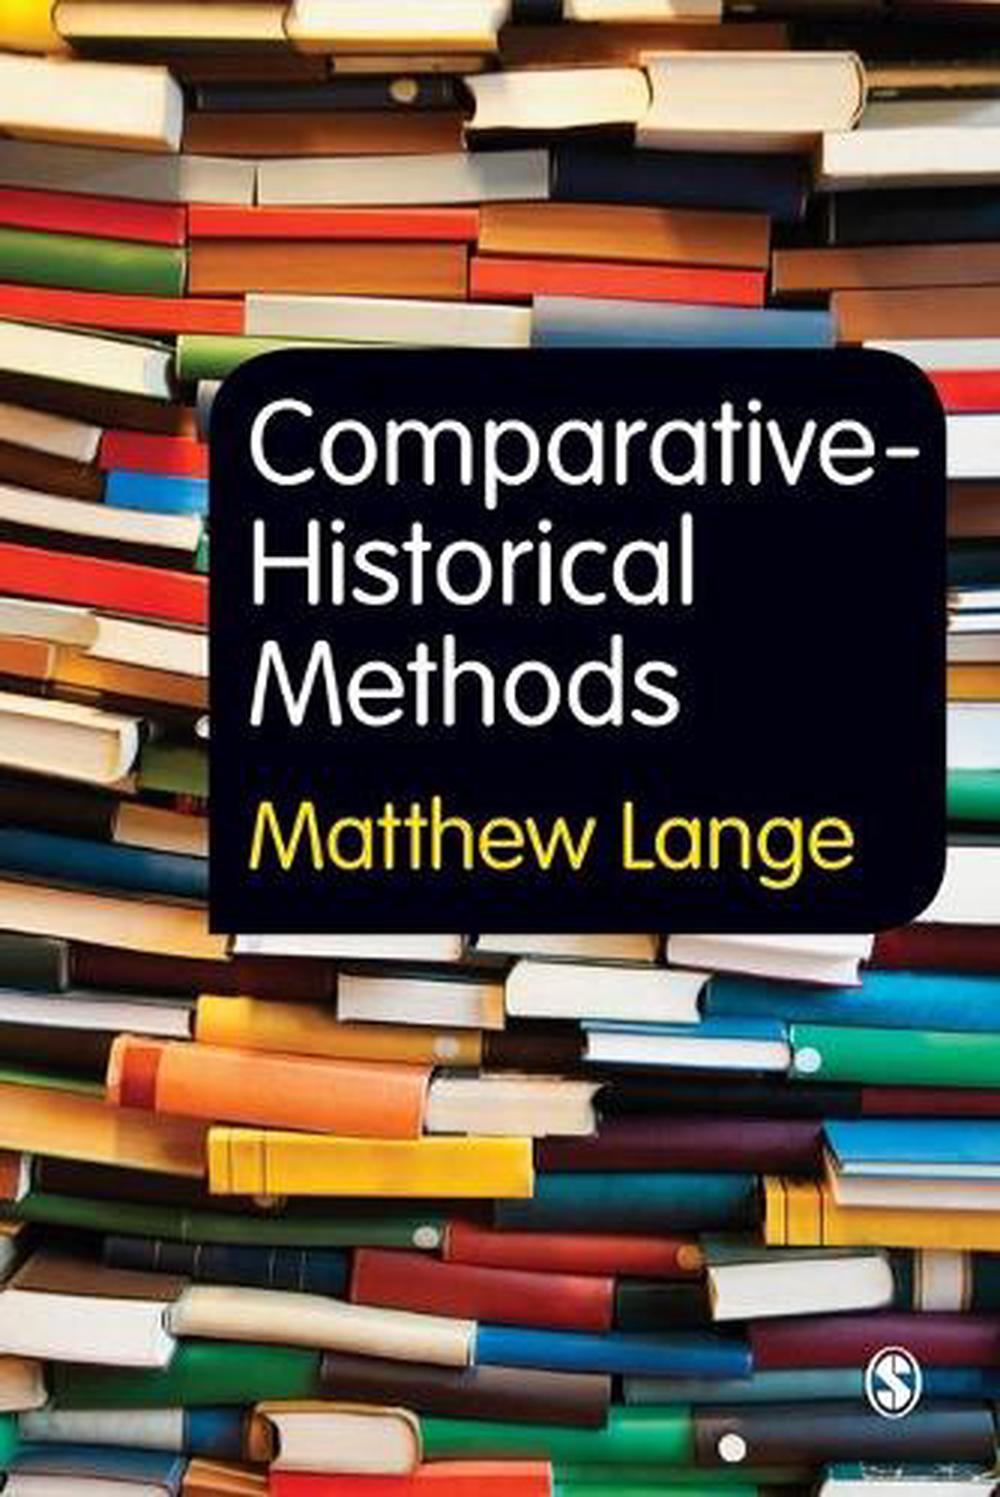 discuss case study or the historical method as a comparative method